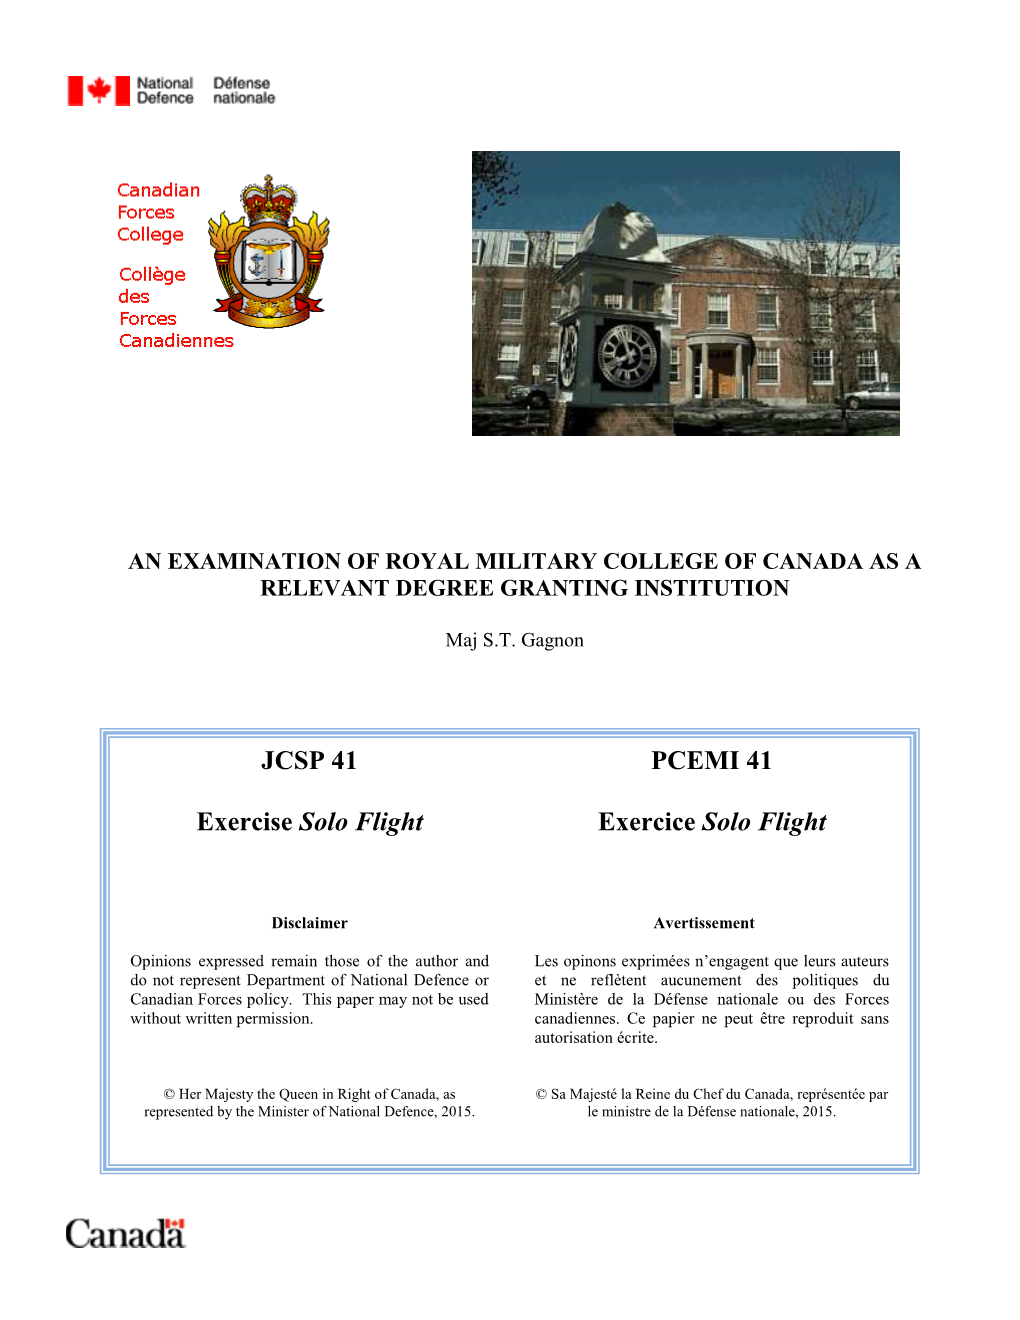 An Examination of Royal Military College of Canada As a Relevant Degree Granting Institution